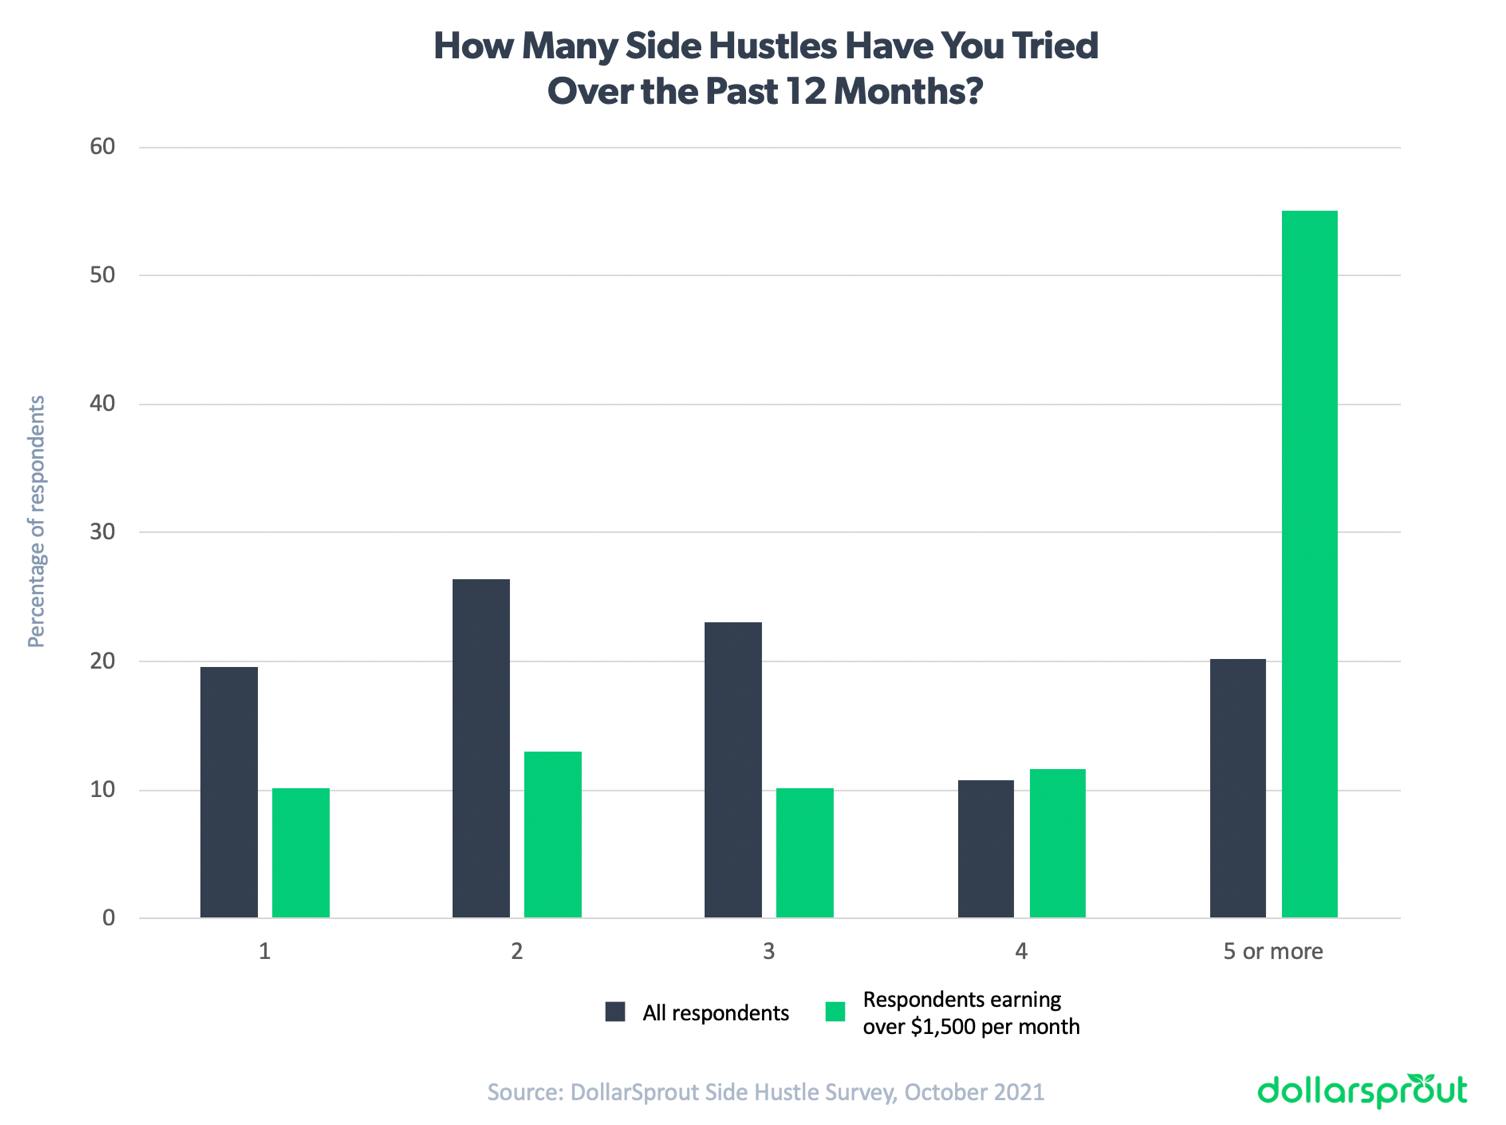 A chart showing that those who have the most earnings are those who are willing to try new things.  More than half of the side scammers earning more than $ 1,500 a month have tried 5 or more side hustlers in the last 12 months.